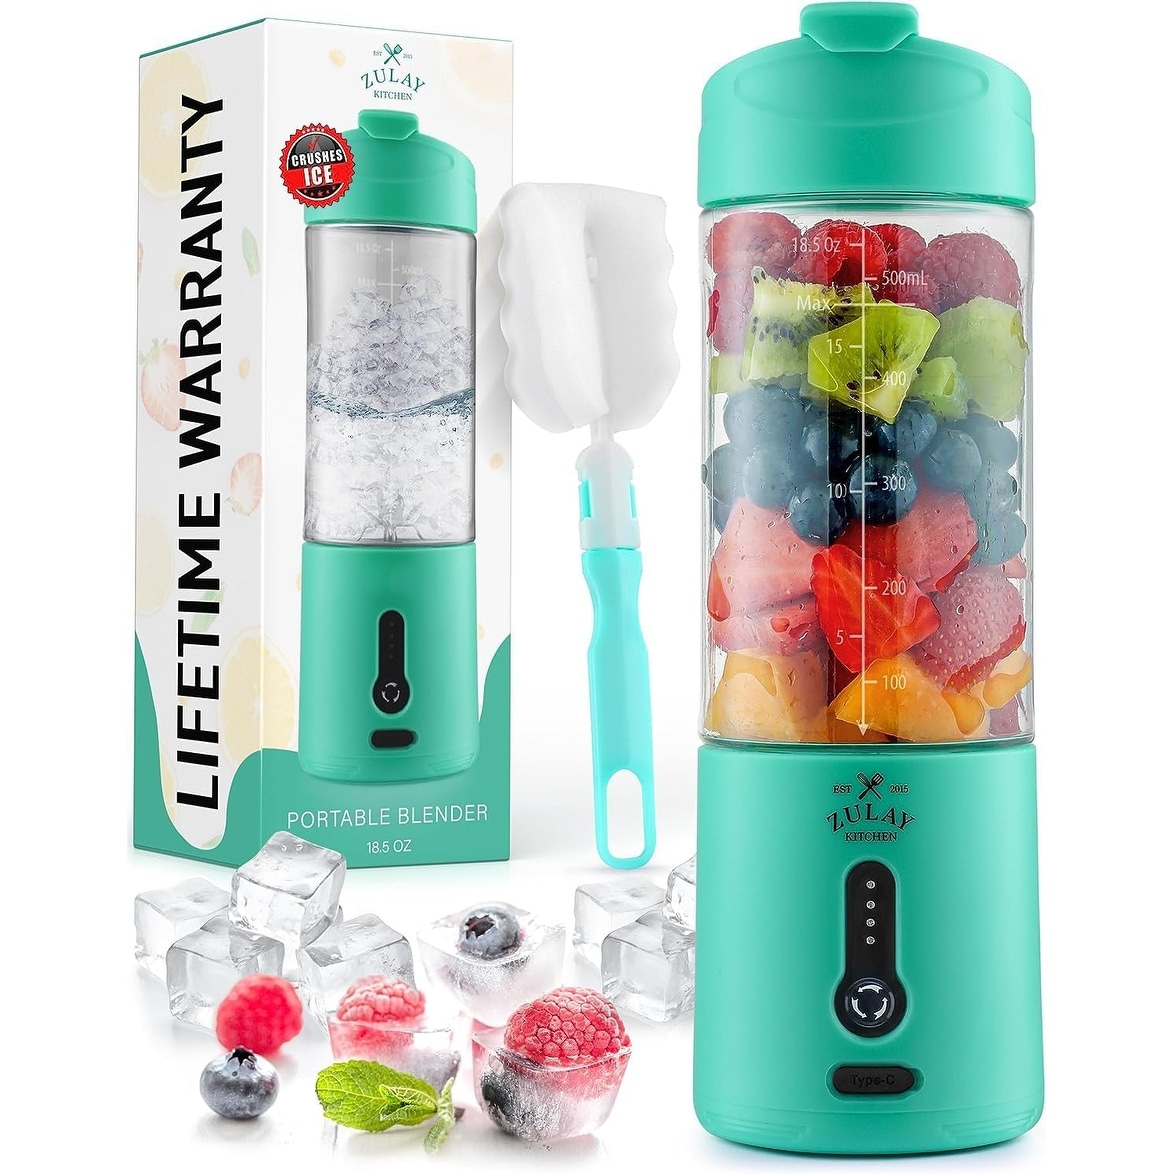 https://ak1.ostkcdn.com/images/products/is/images/direct/35f981ea502f4f61a4cdde6da1eb4b2d7b50376b/Zulay-Kitchen-18oz-Personal-Blenders-that-Crush-Ice.jpg